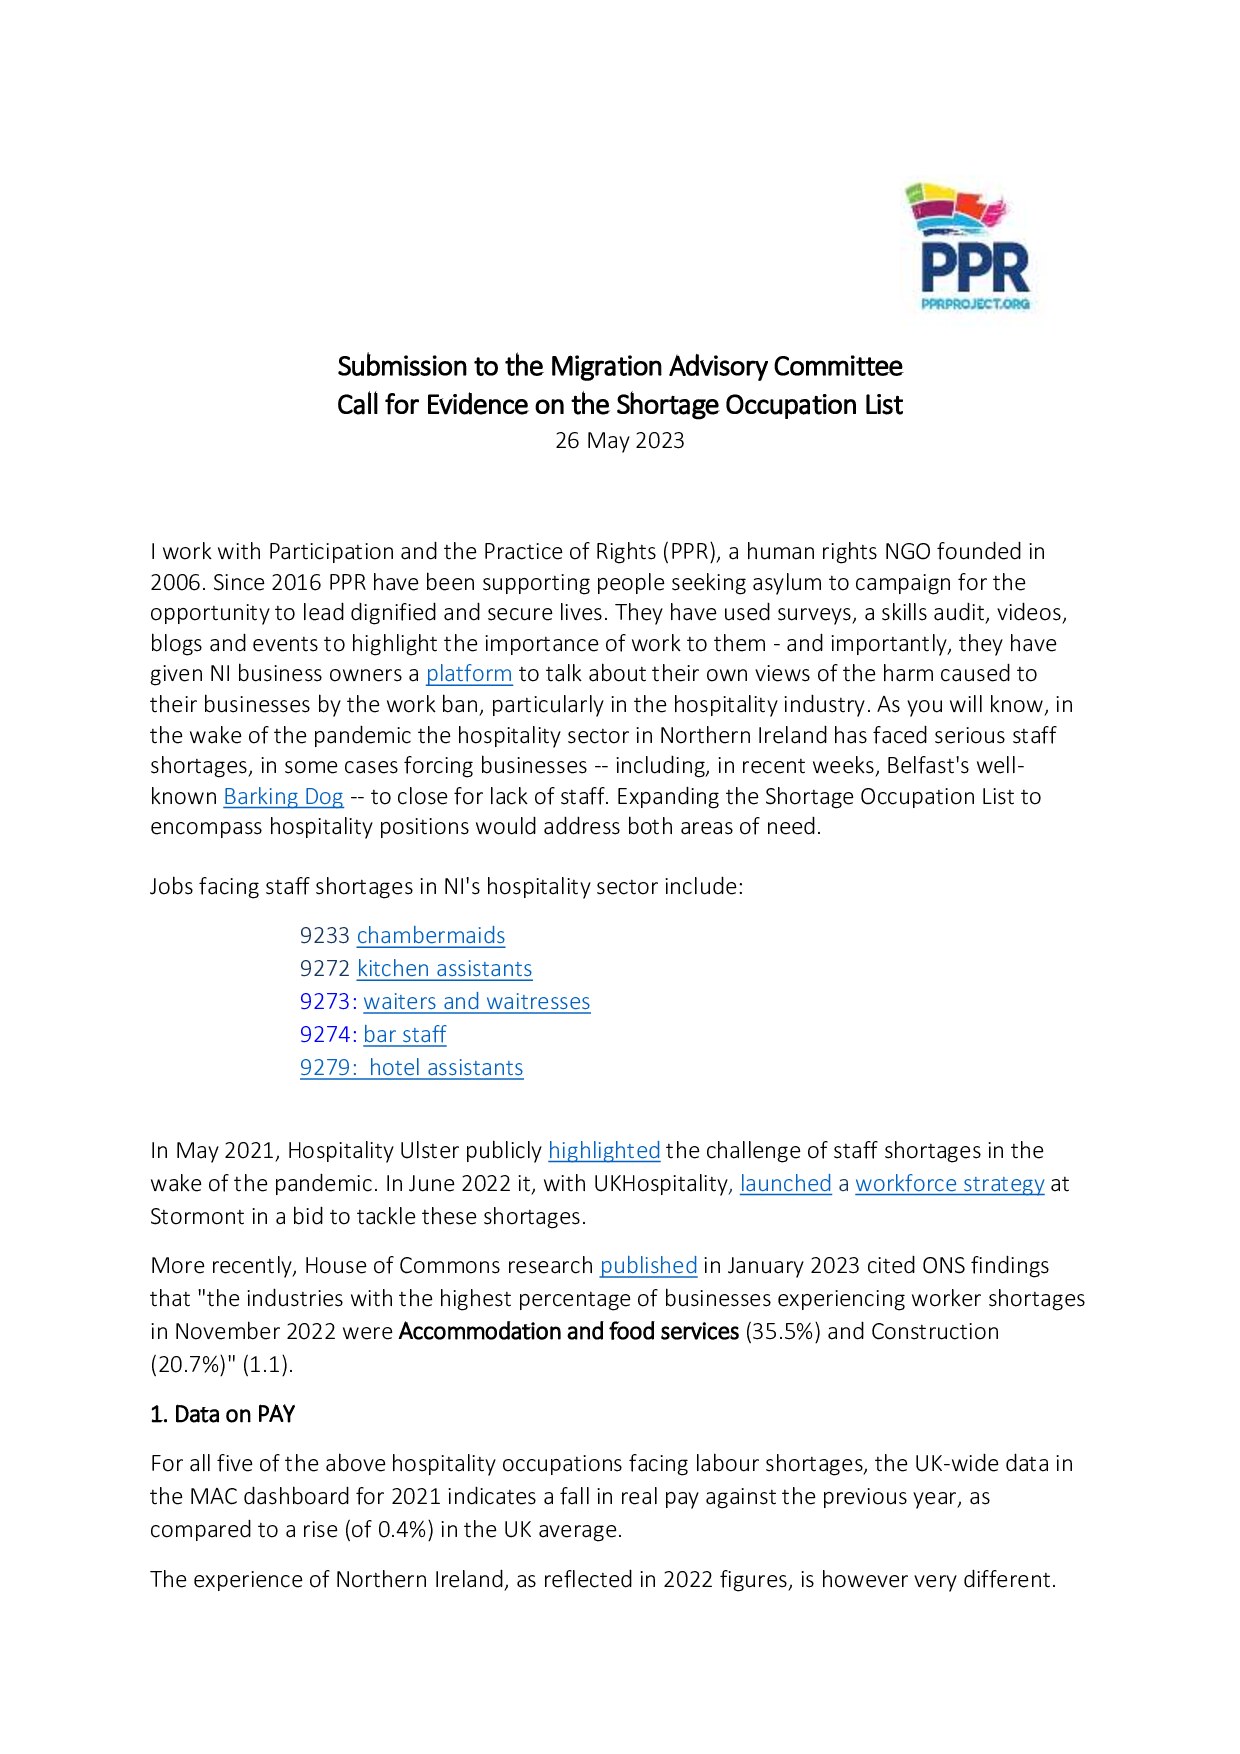 Response:  Migration Advisory Committee Call for Evidence on the Shortage Occupation List